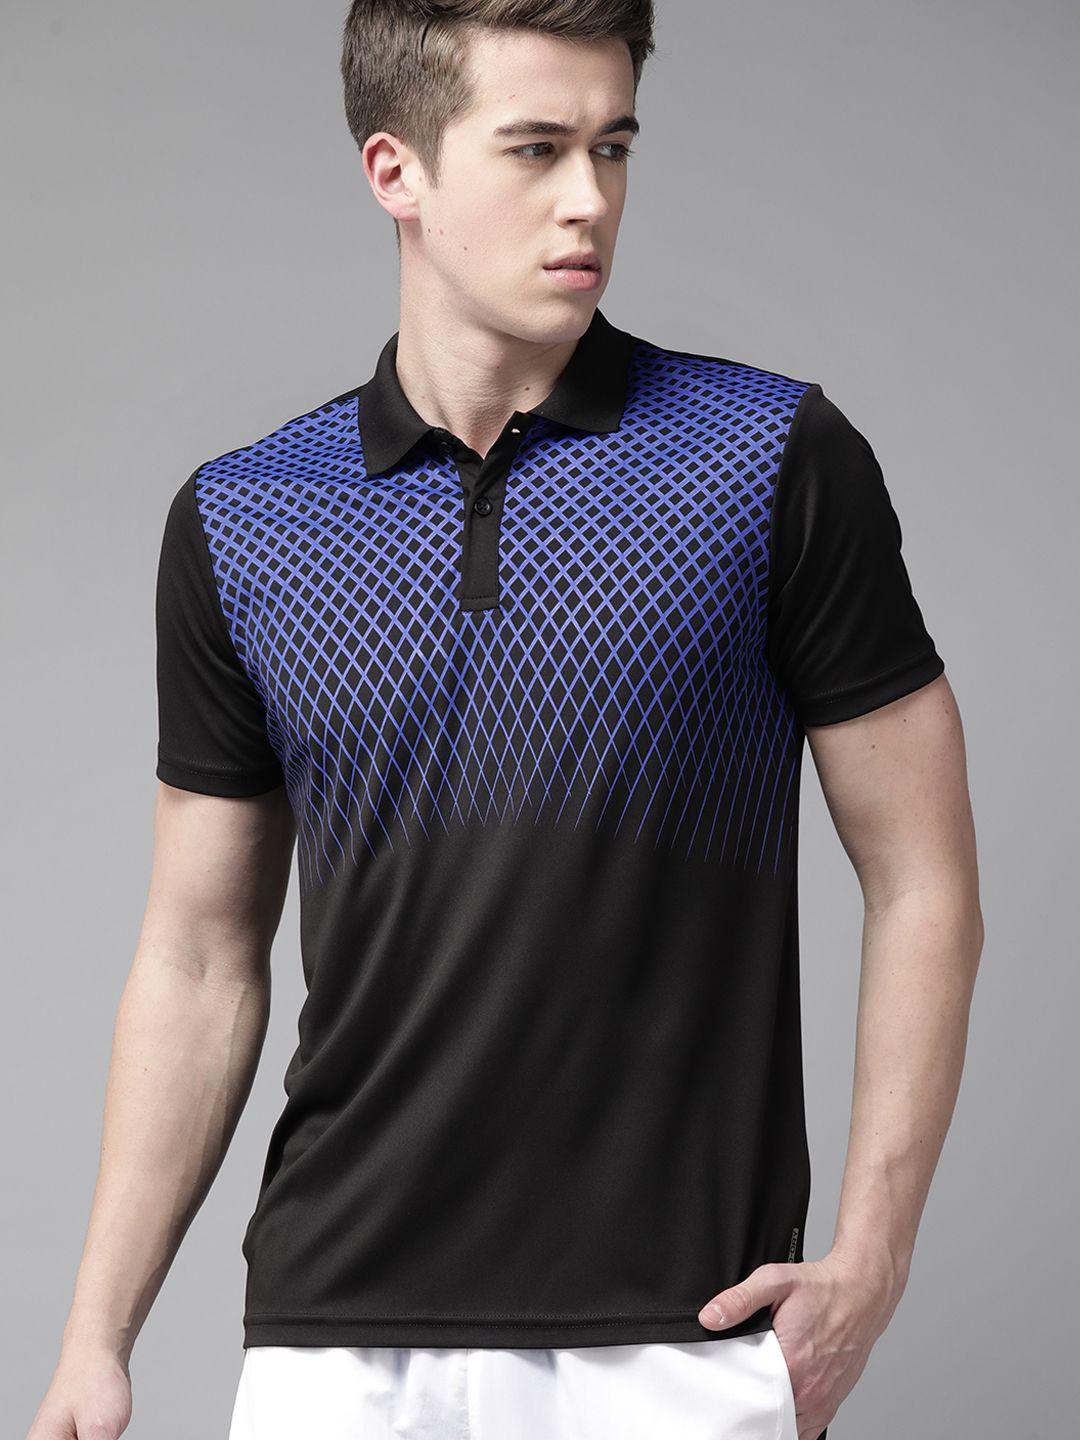 prowl by tiger shroff speed dry polo collar running t-shirt